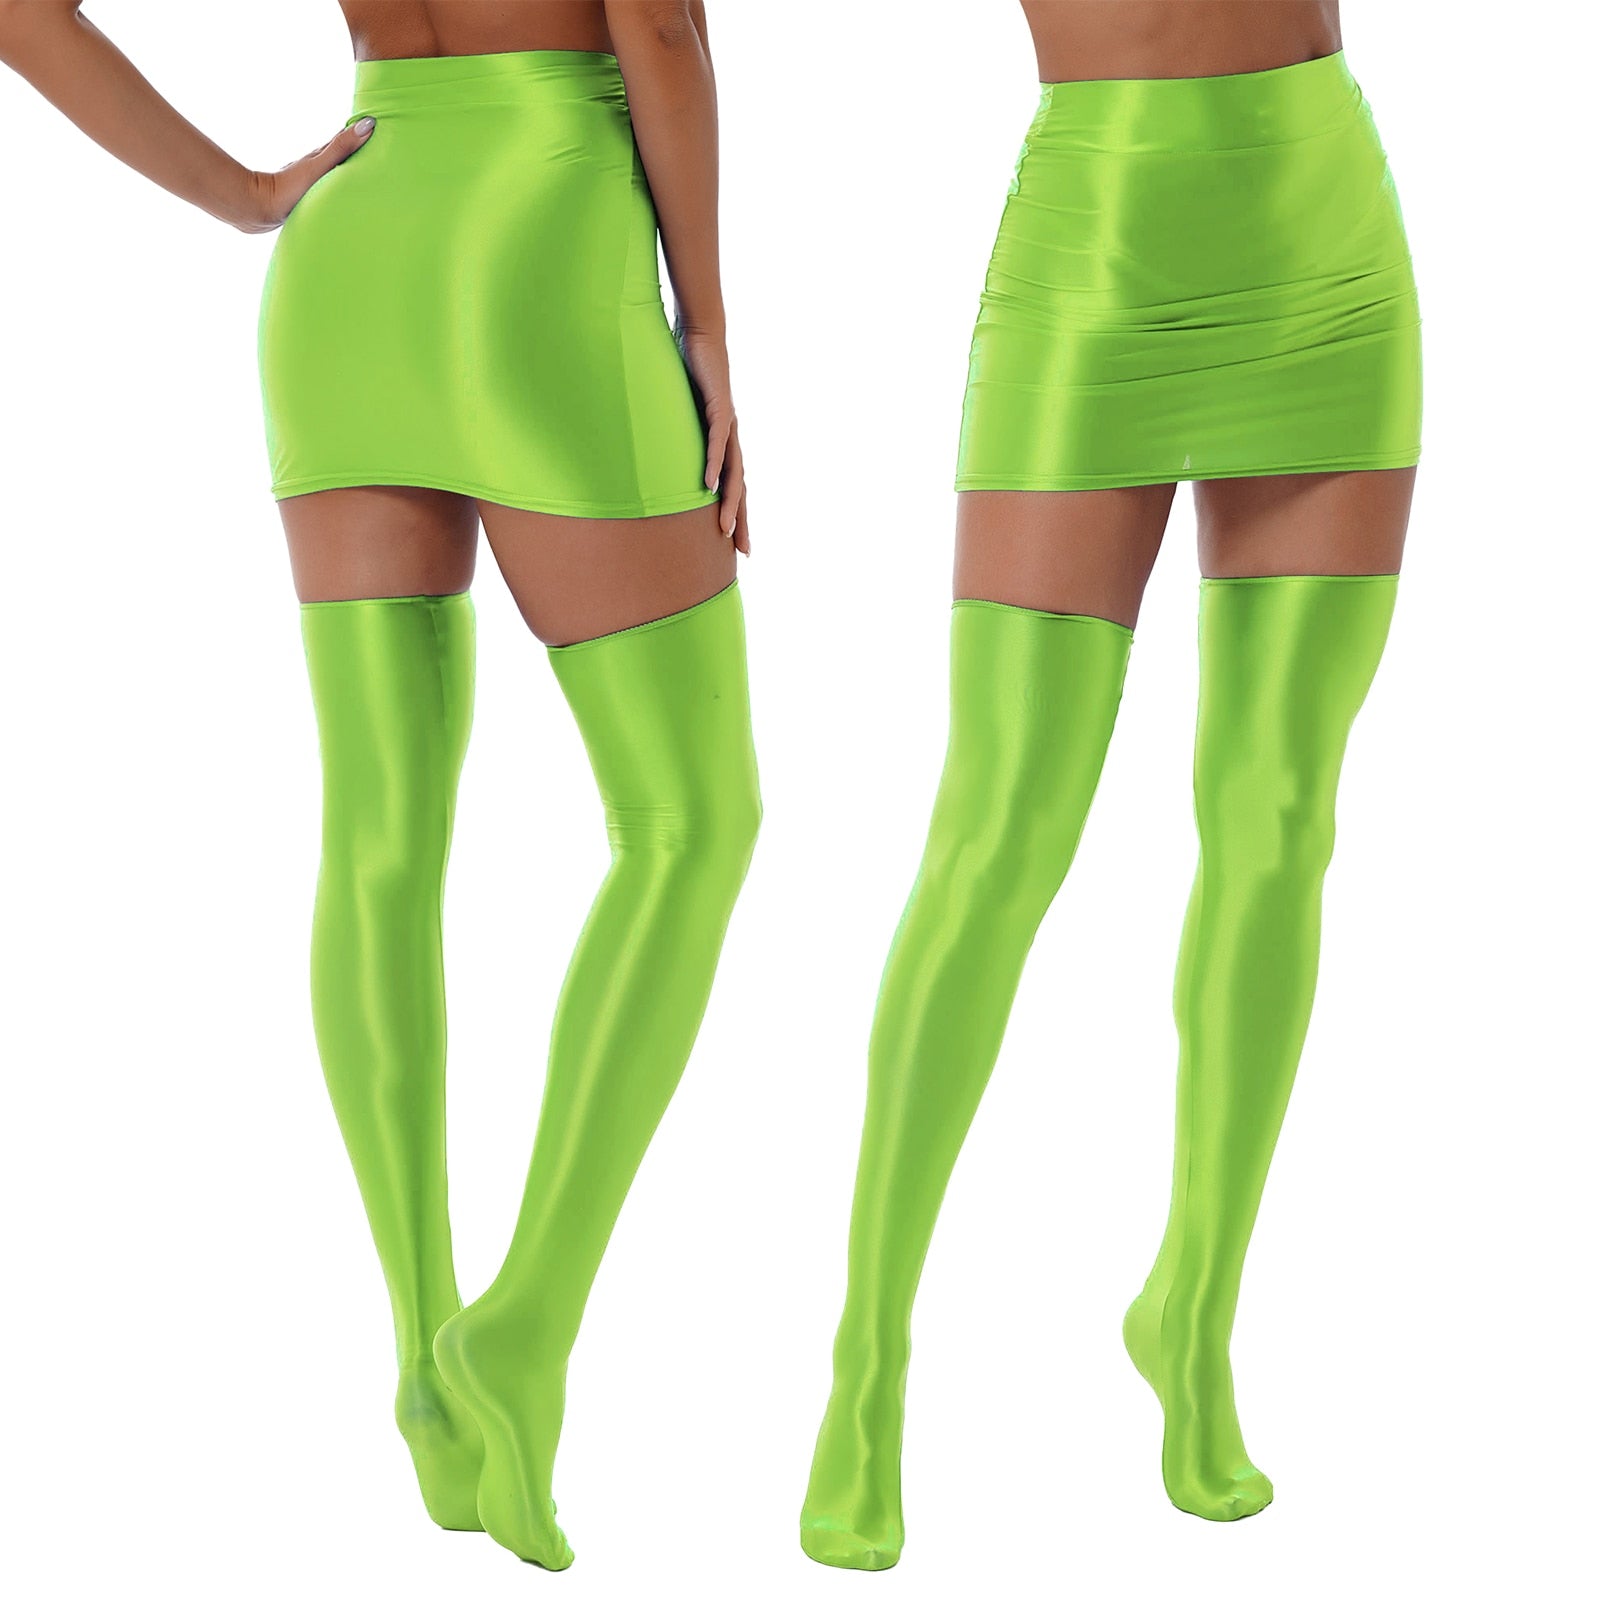 Back and front view of lady wearing wet look green mini skirts with matching thigh high stockings.